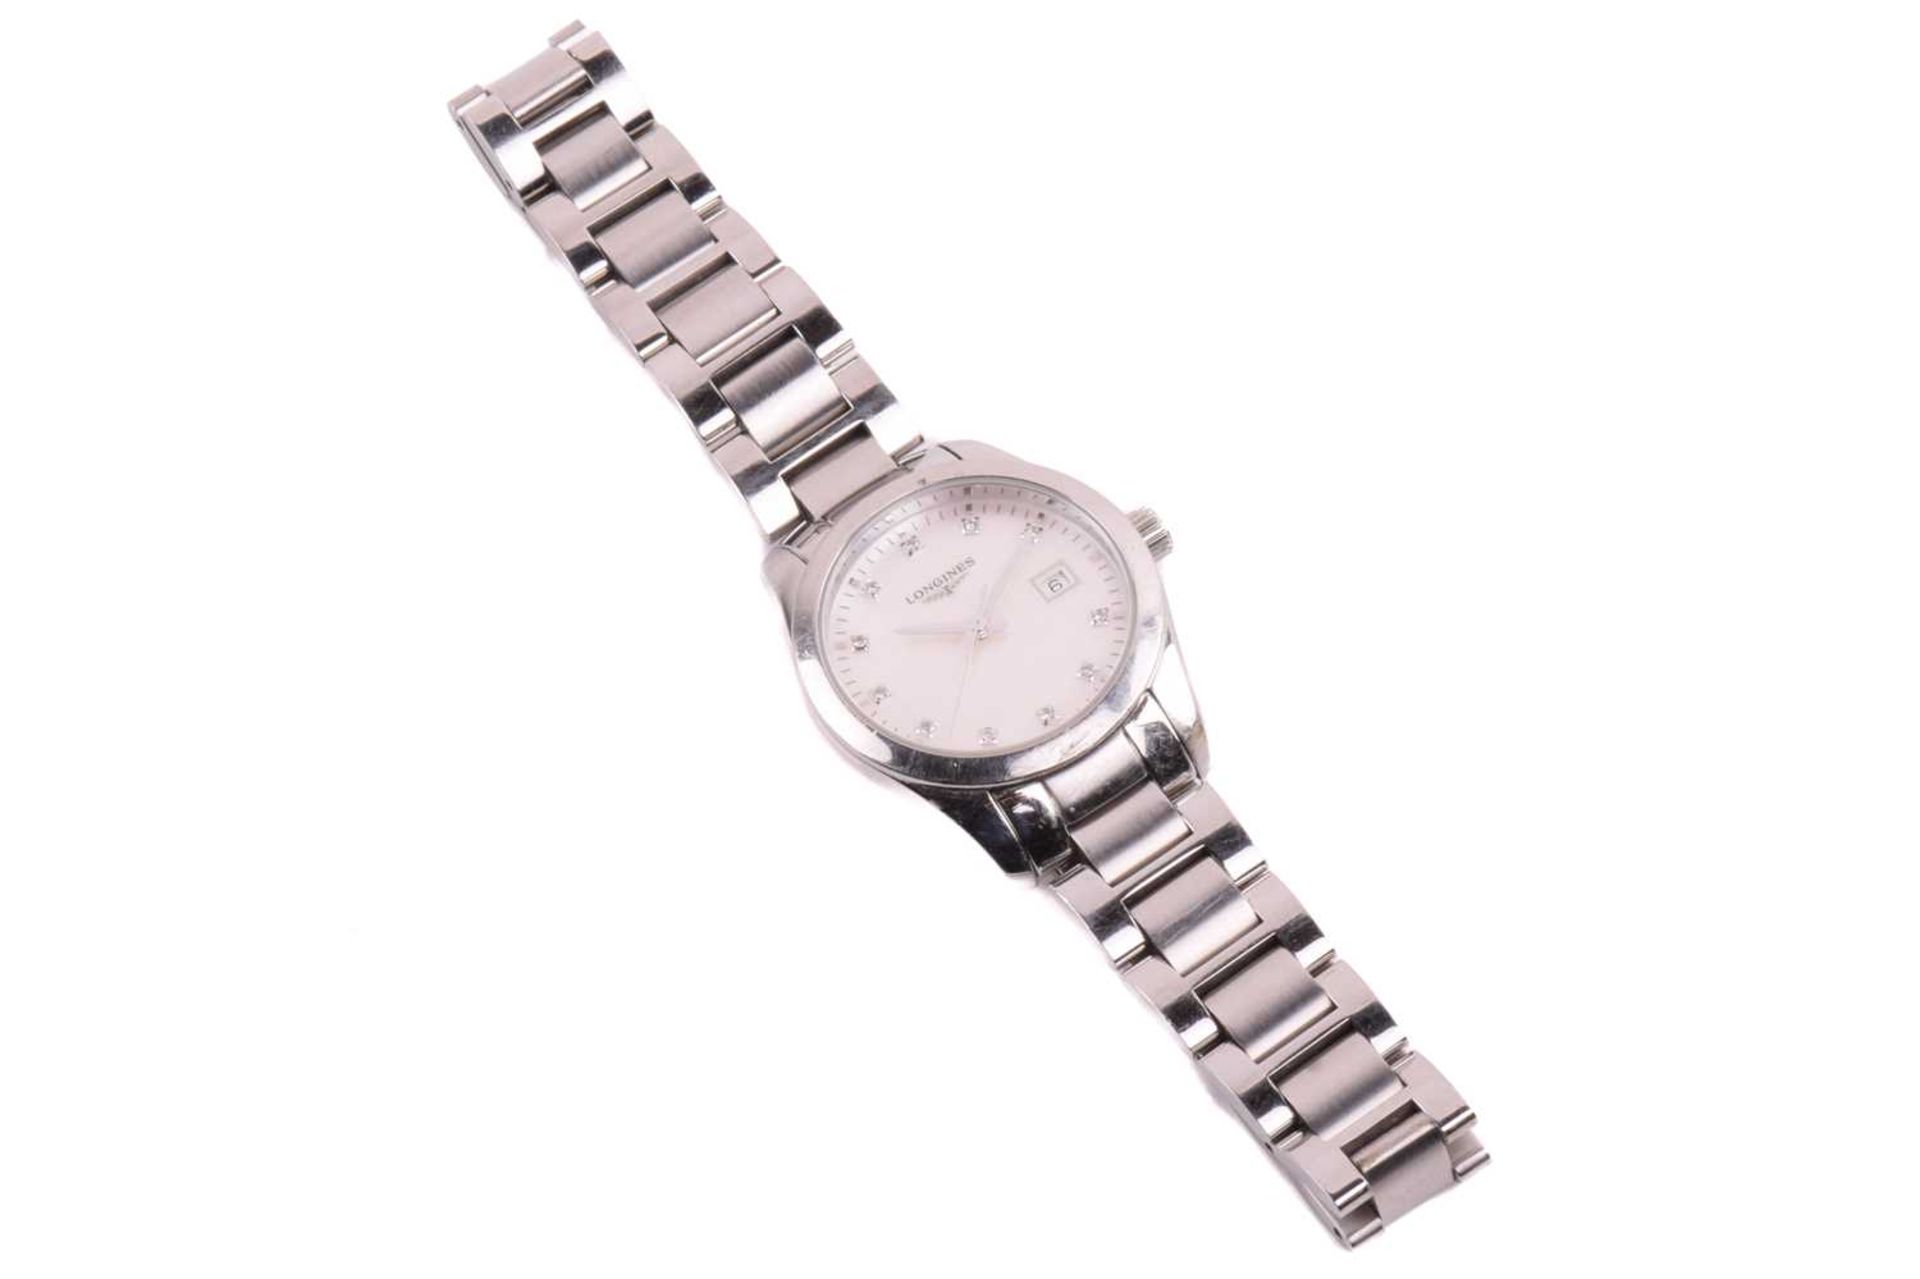 A Longines Classic lady's wristwatch, featuring a Swiss-made quartz movement in a steel case - Image 6 of 8